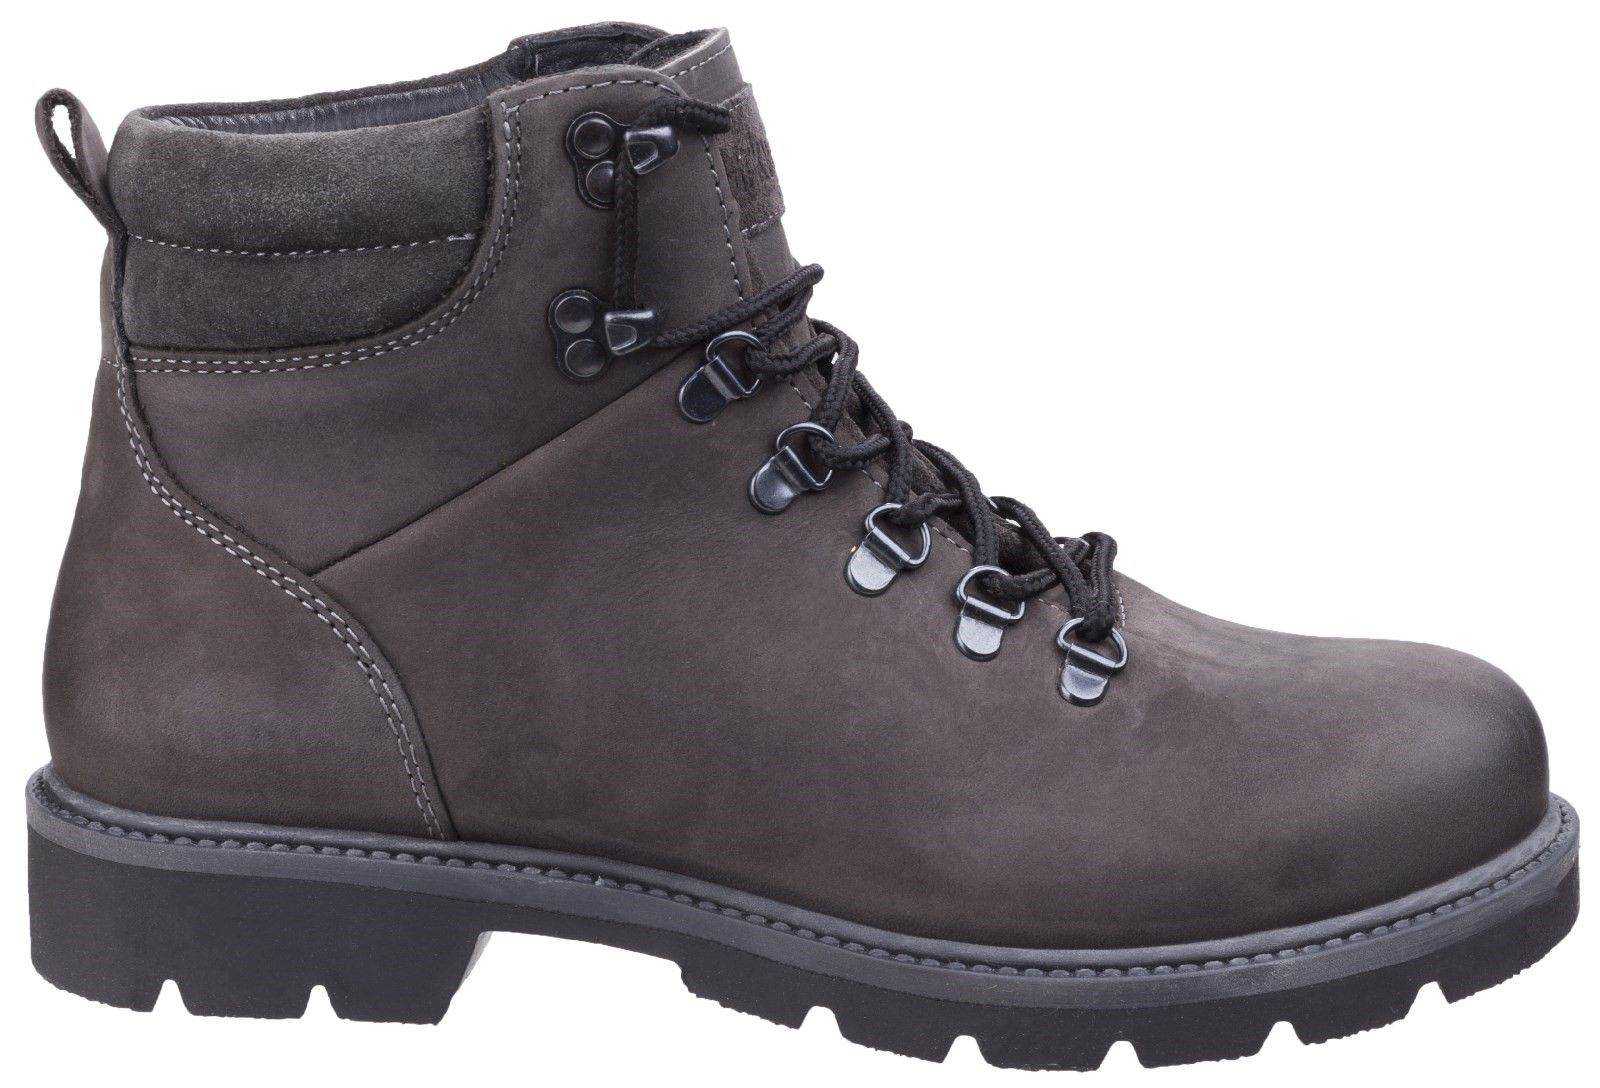 Darkwood boots with classy design, featuring water-resistant membrane. Perfect for hiking and cold weather conditions. Mens water-resistant casual boot. 
Warm-Lining. 
Ideal for autumn and winter. 
Water-resistant genuine leather. 
Good level of puncture resistance against brambles.